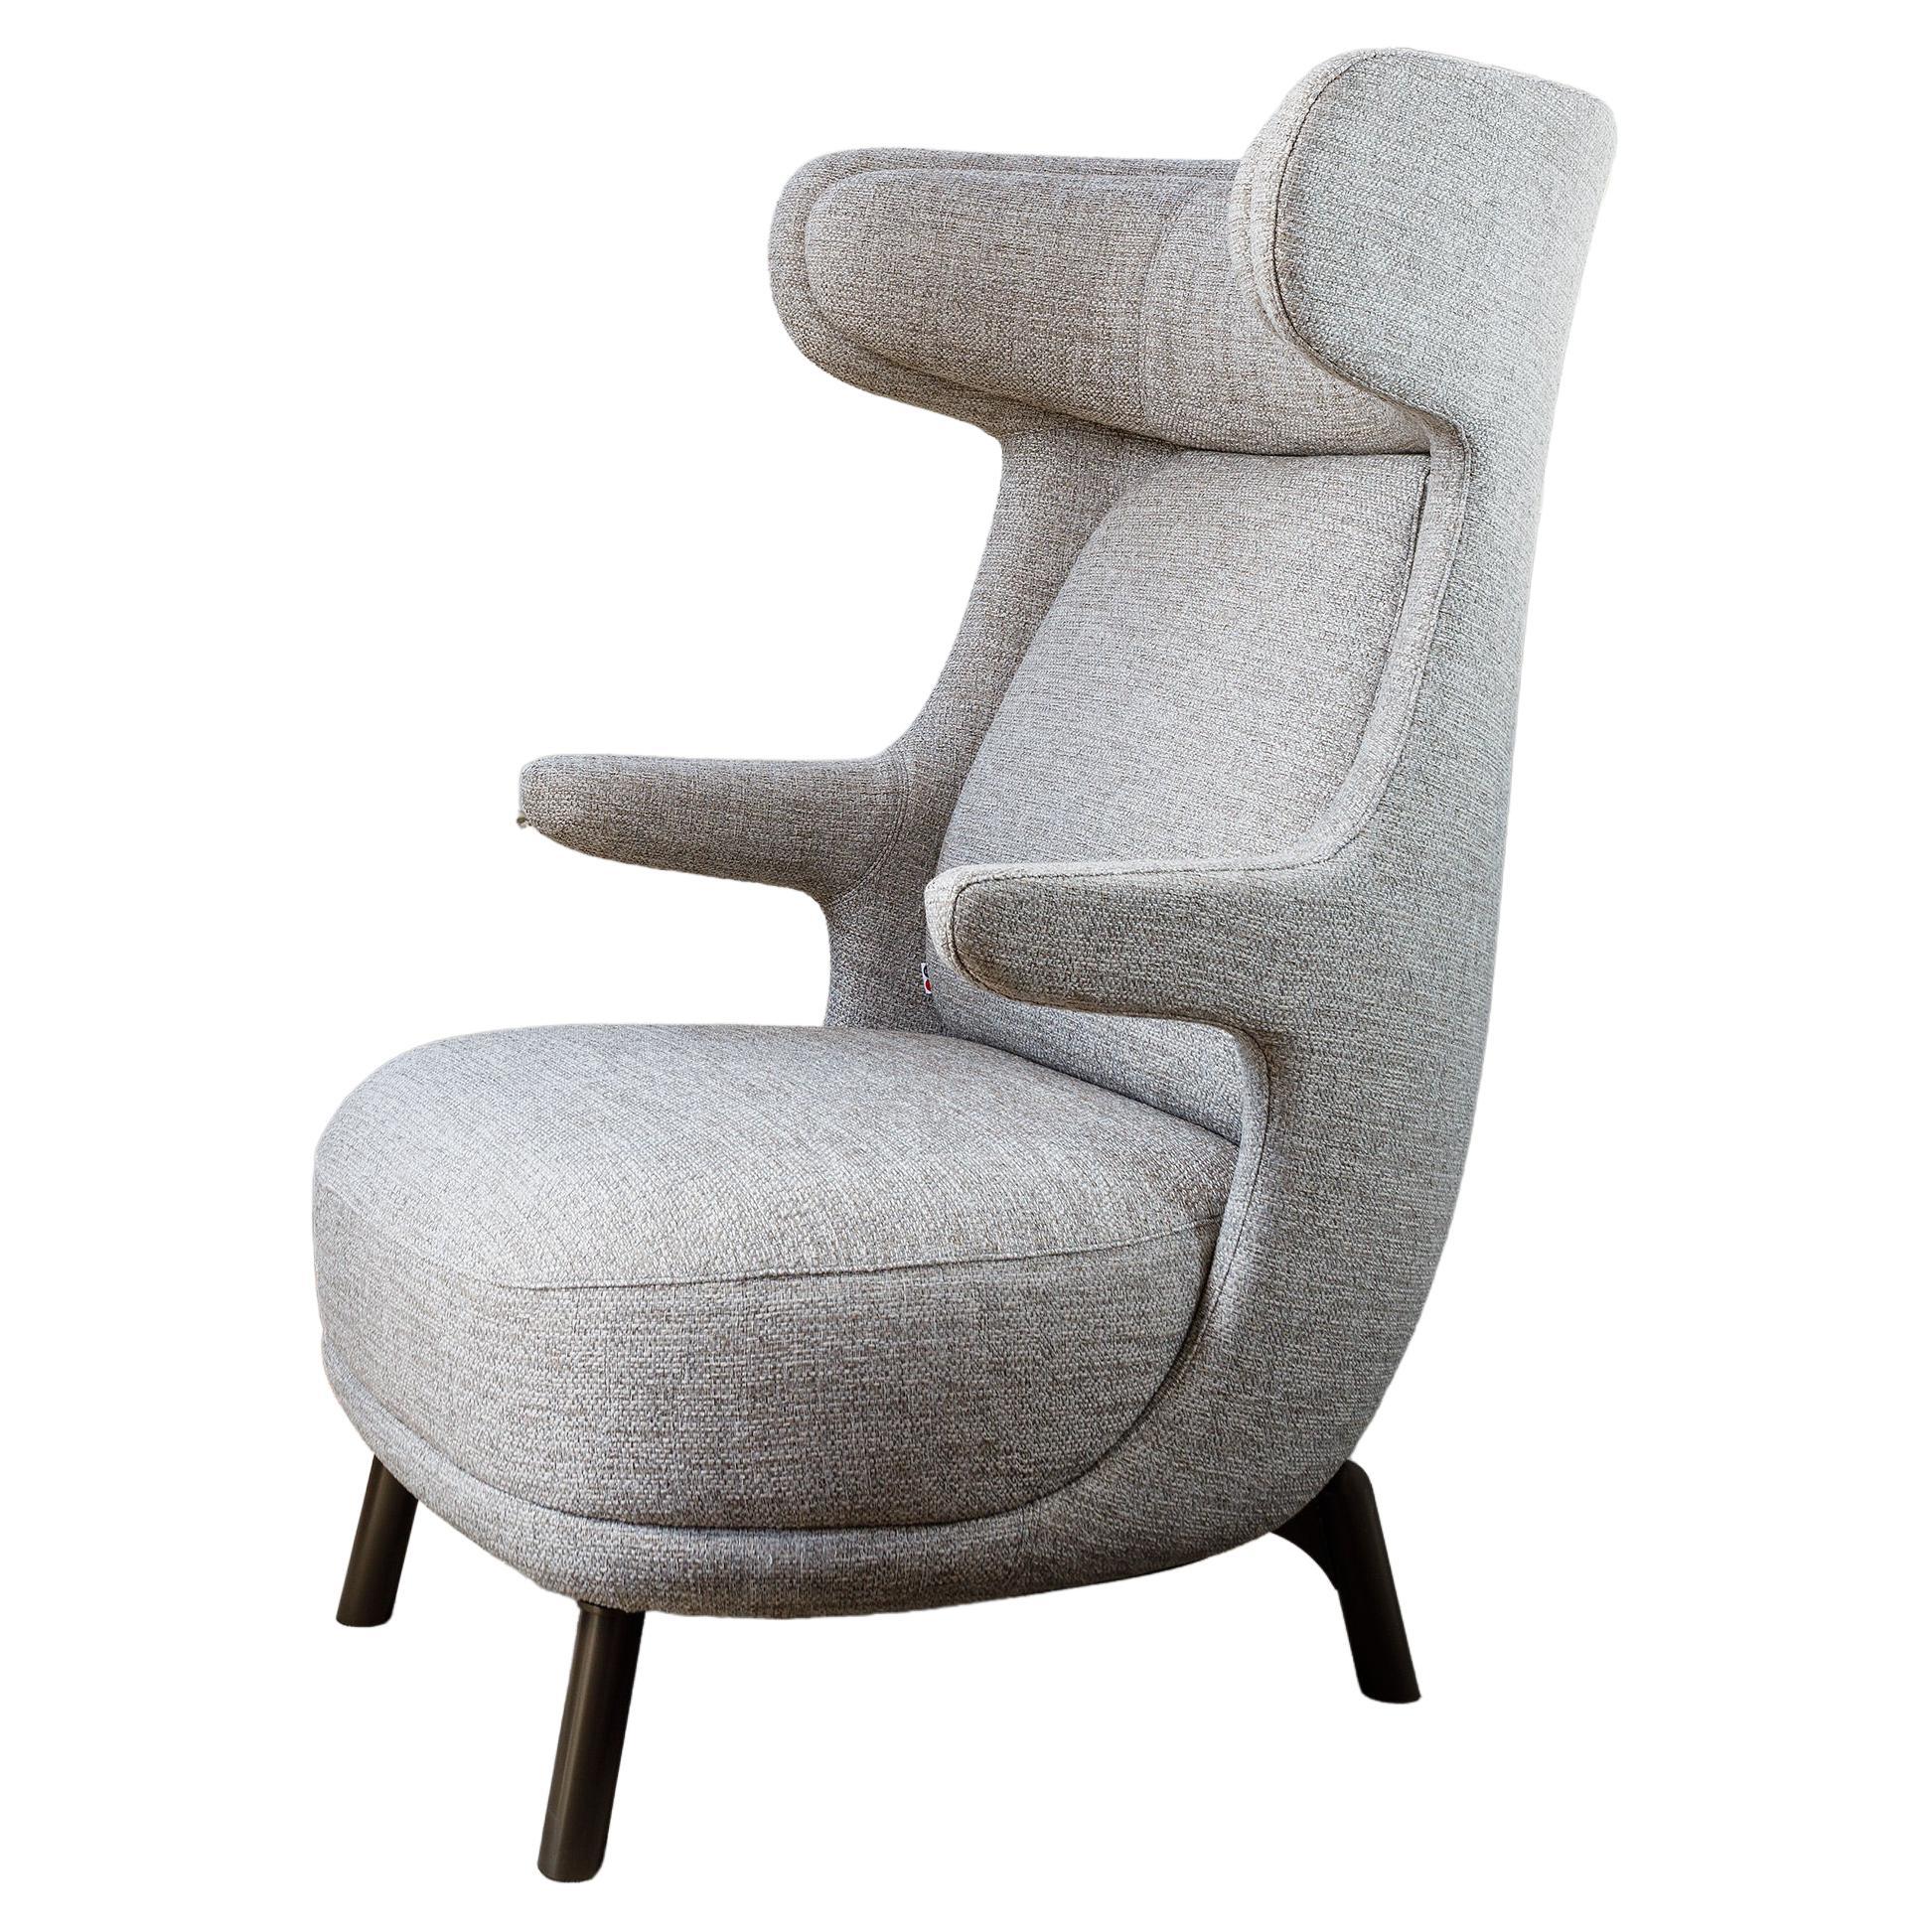 Contemporary Jaime Hayon Grey Dino Living Room Armchair Fabric Upholstered 